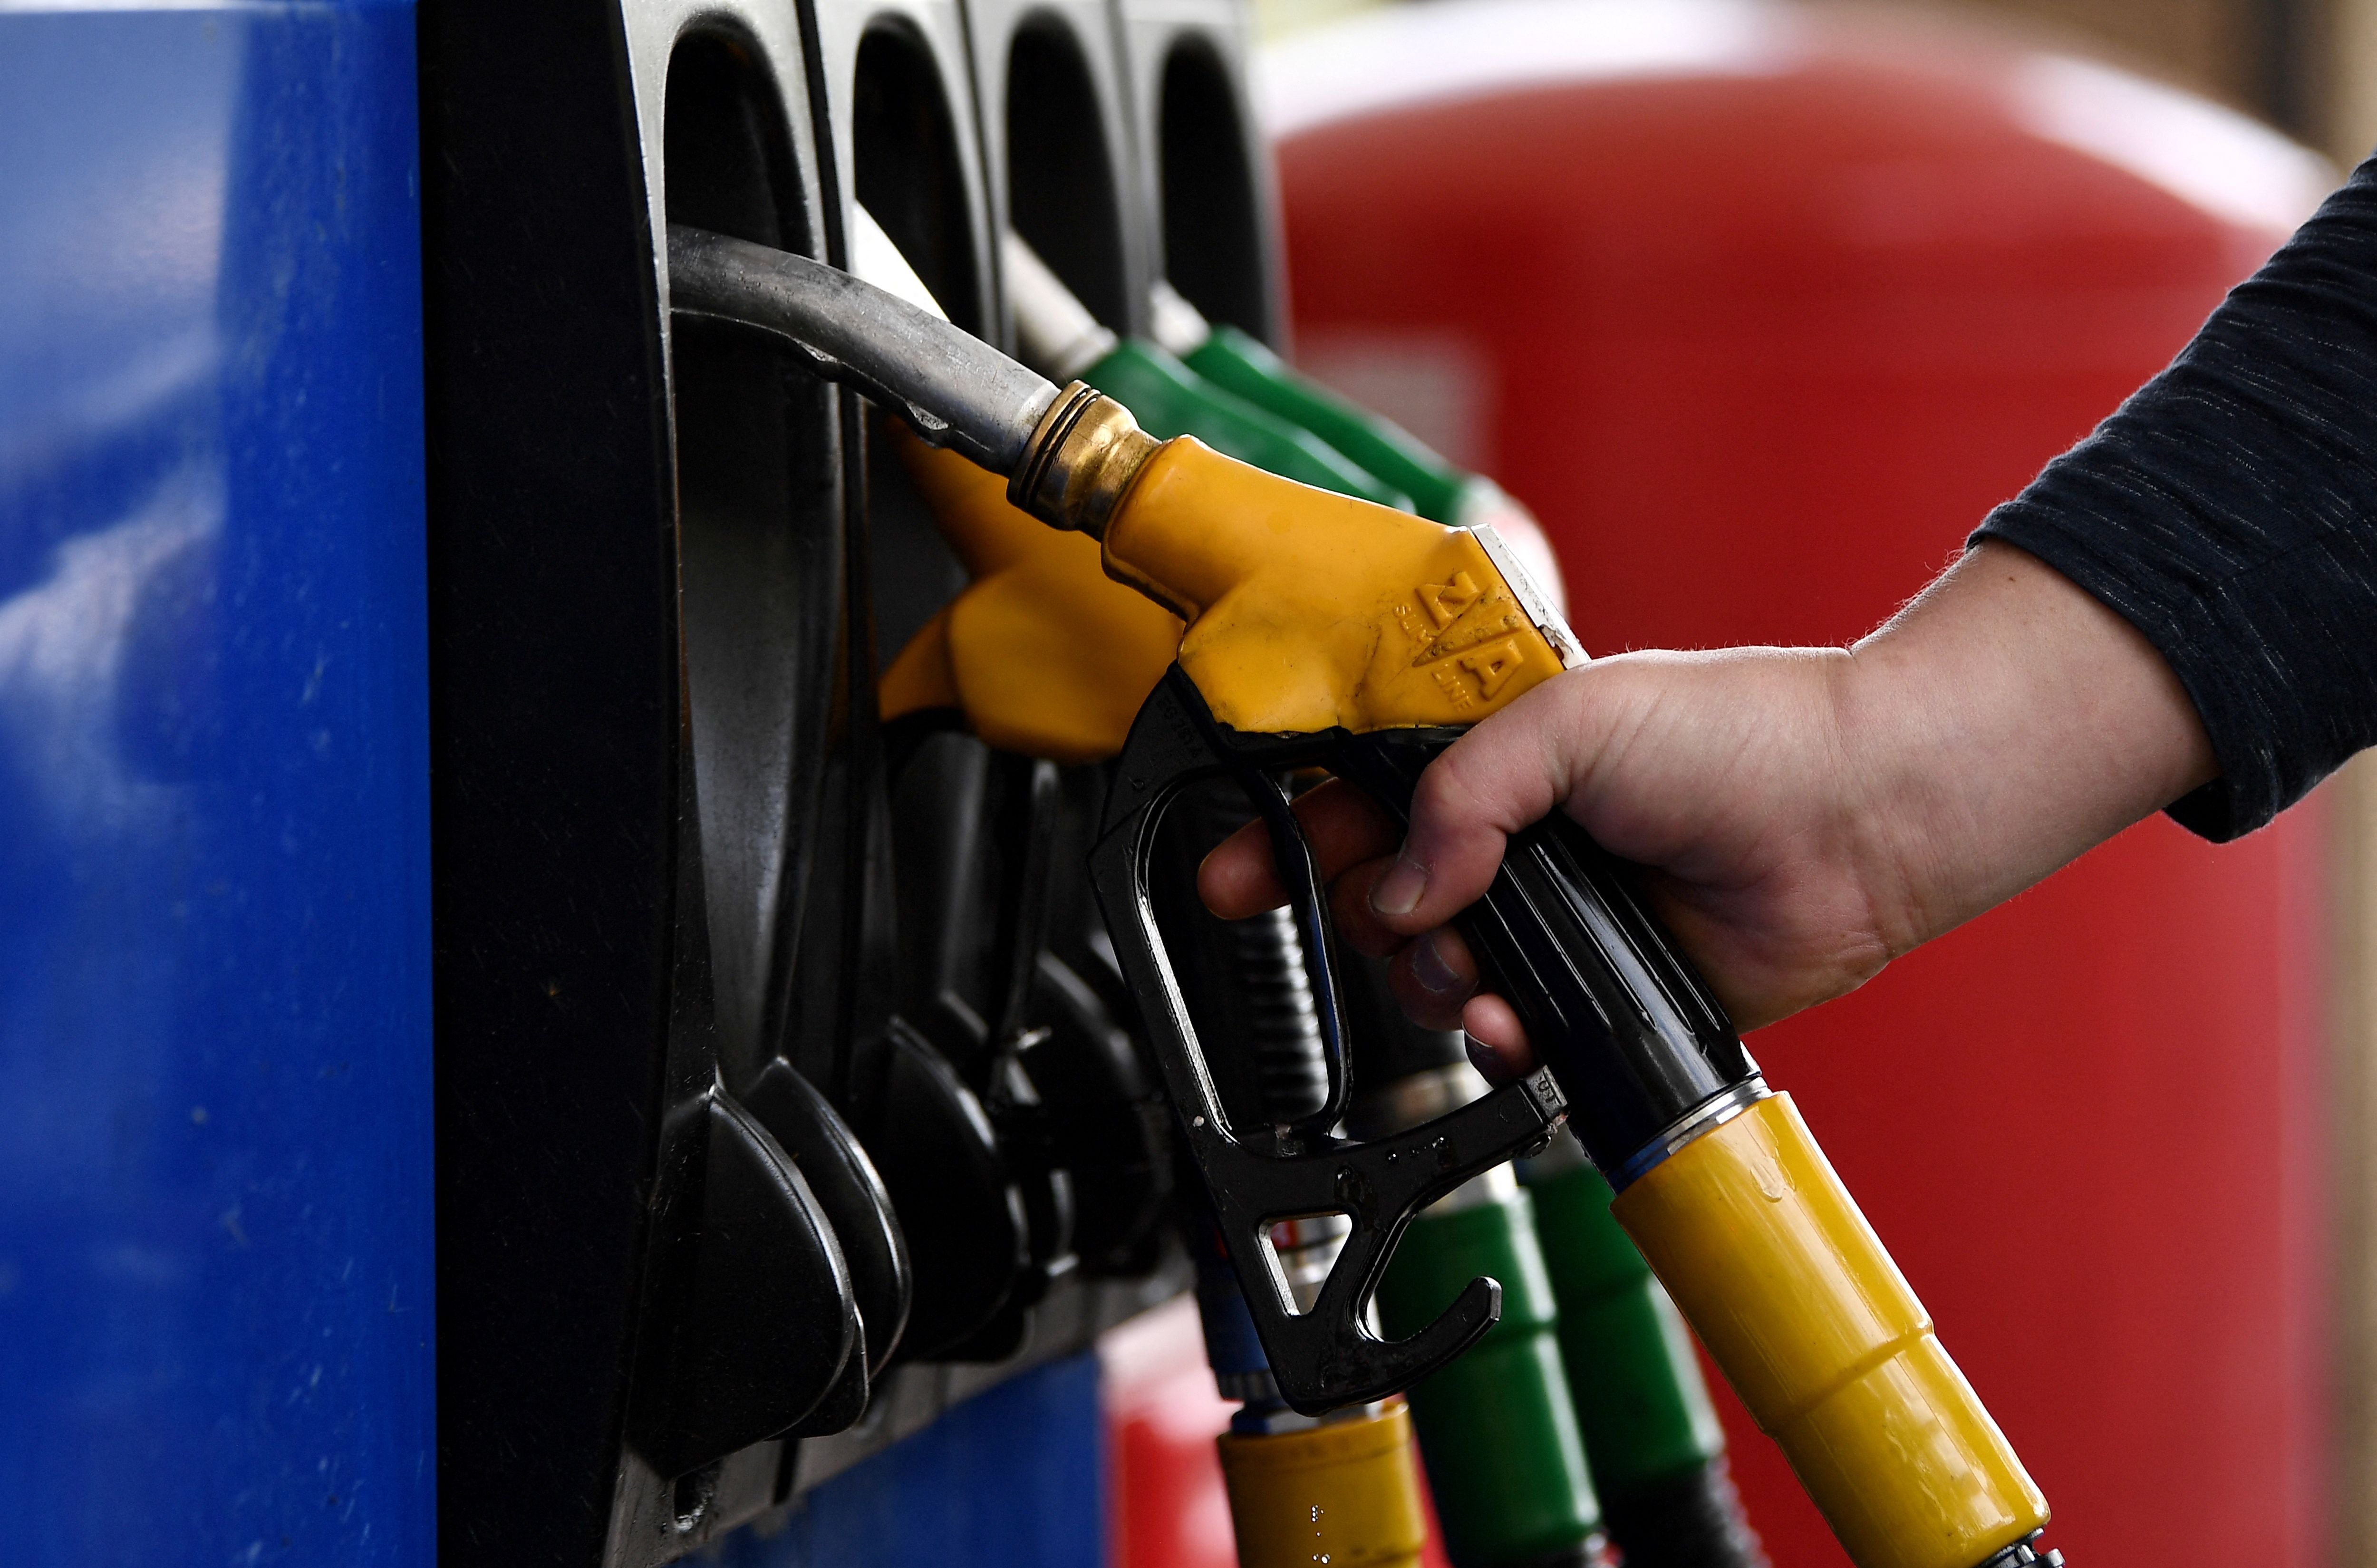 The average cost of a litre of diesel was 173.4p